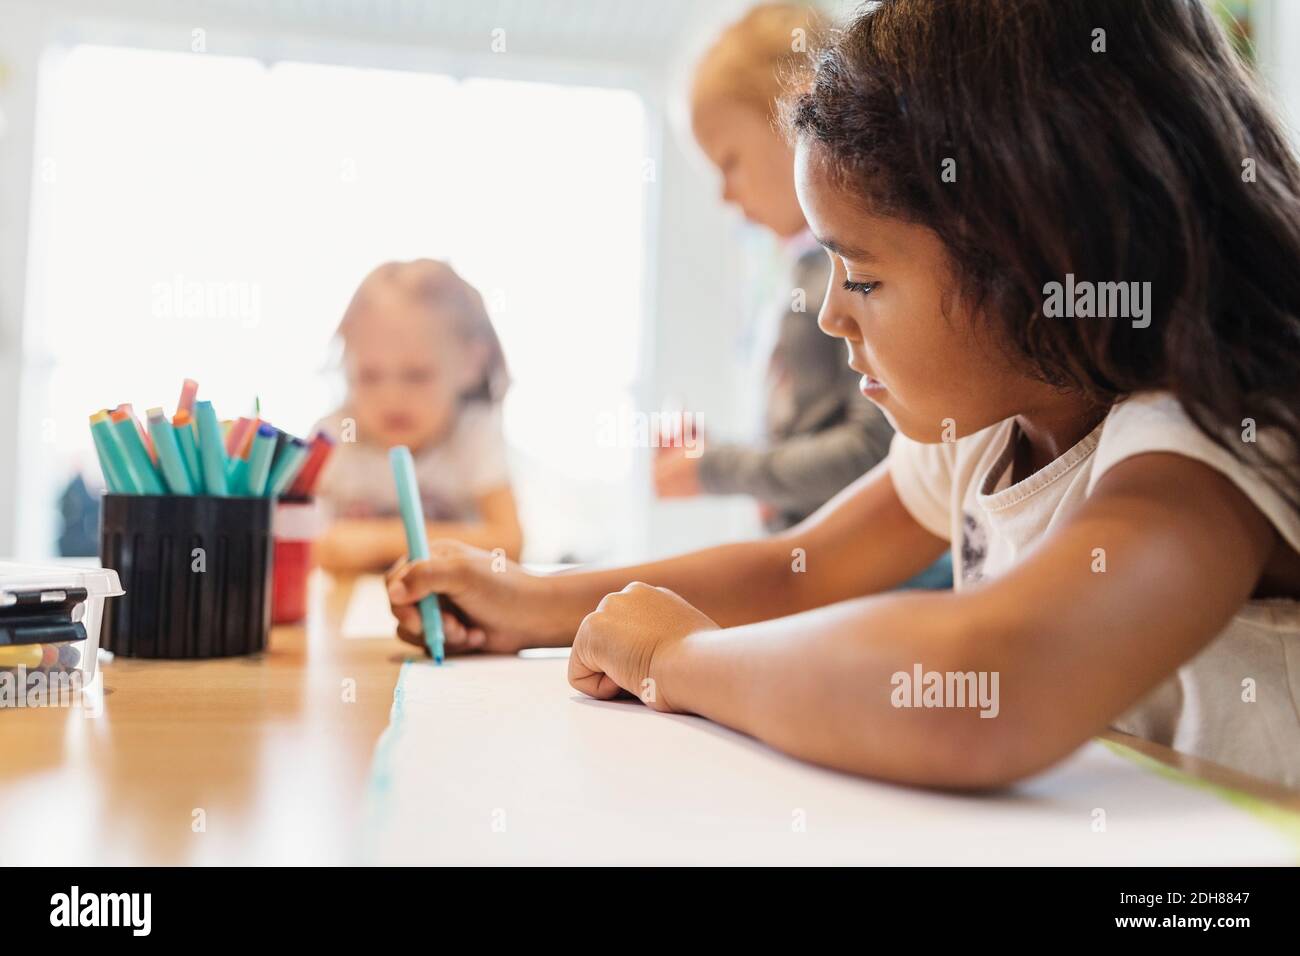 Girl using felt tip pen in drawing class with classmates in background Stock Photo